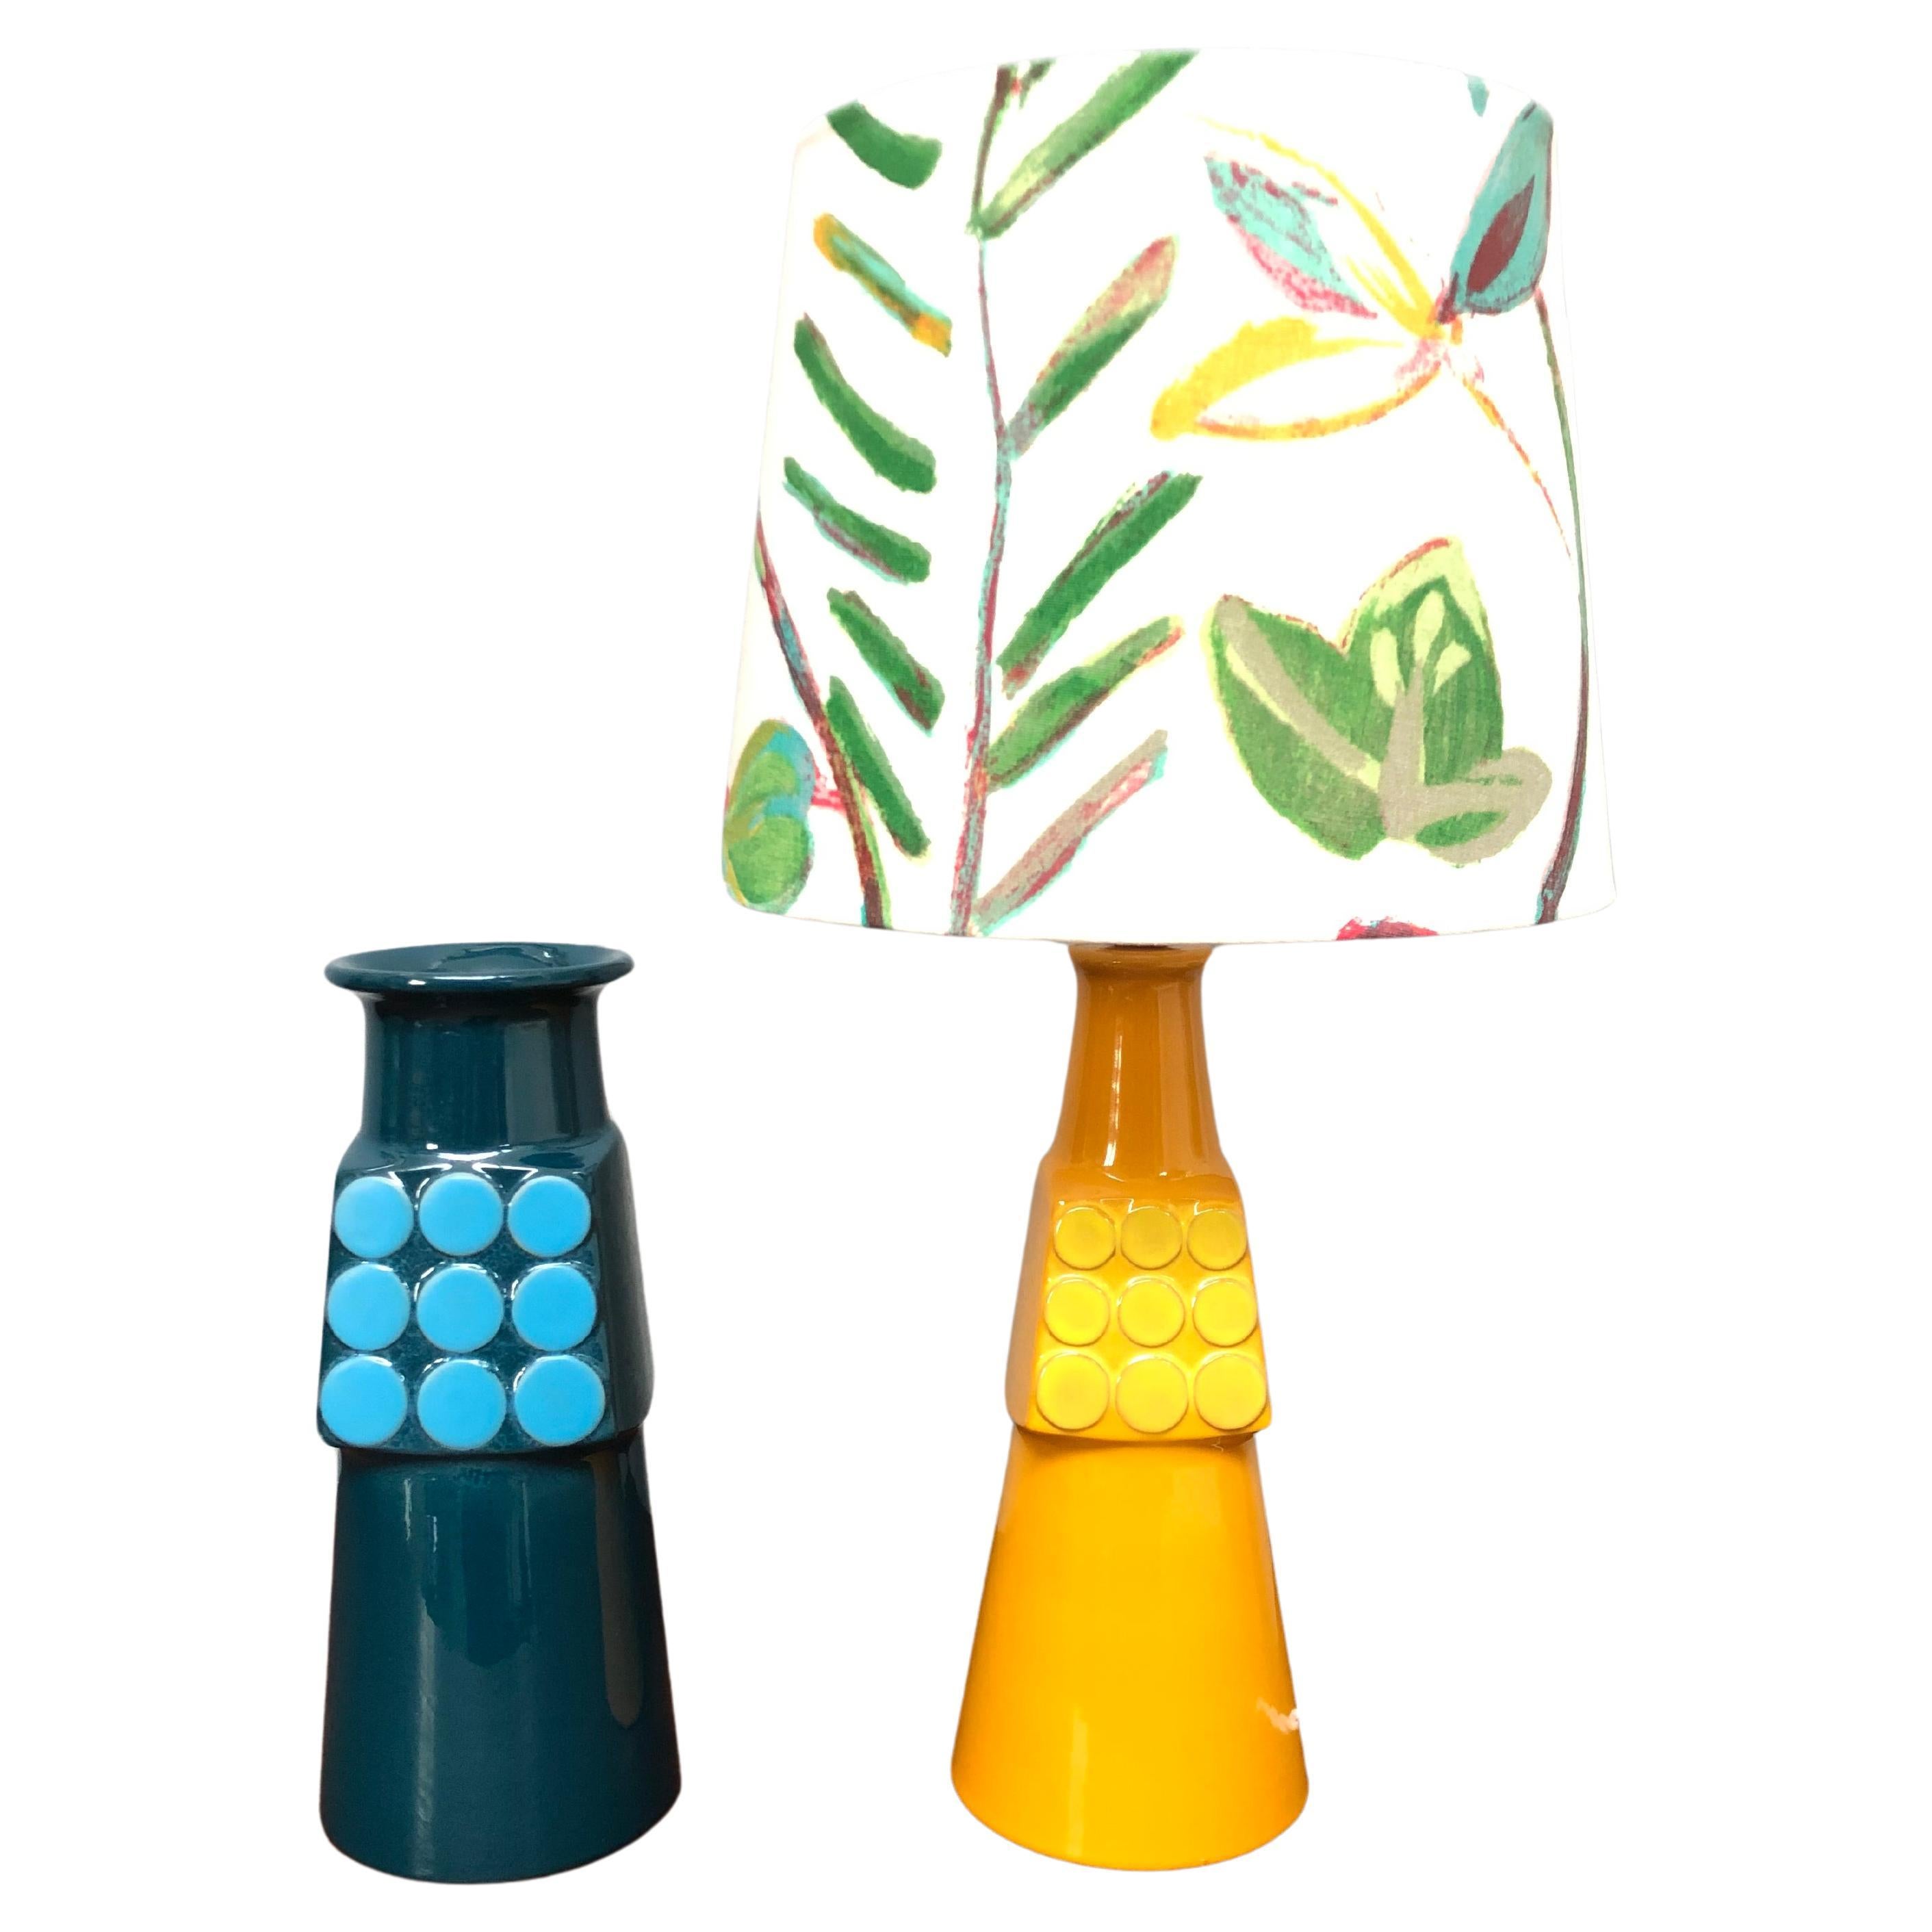 A Vintage Pottery Table Lamp From Knabstrup Of Denmark With Matching Vase